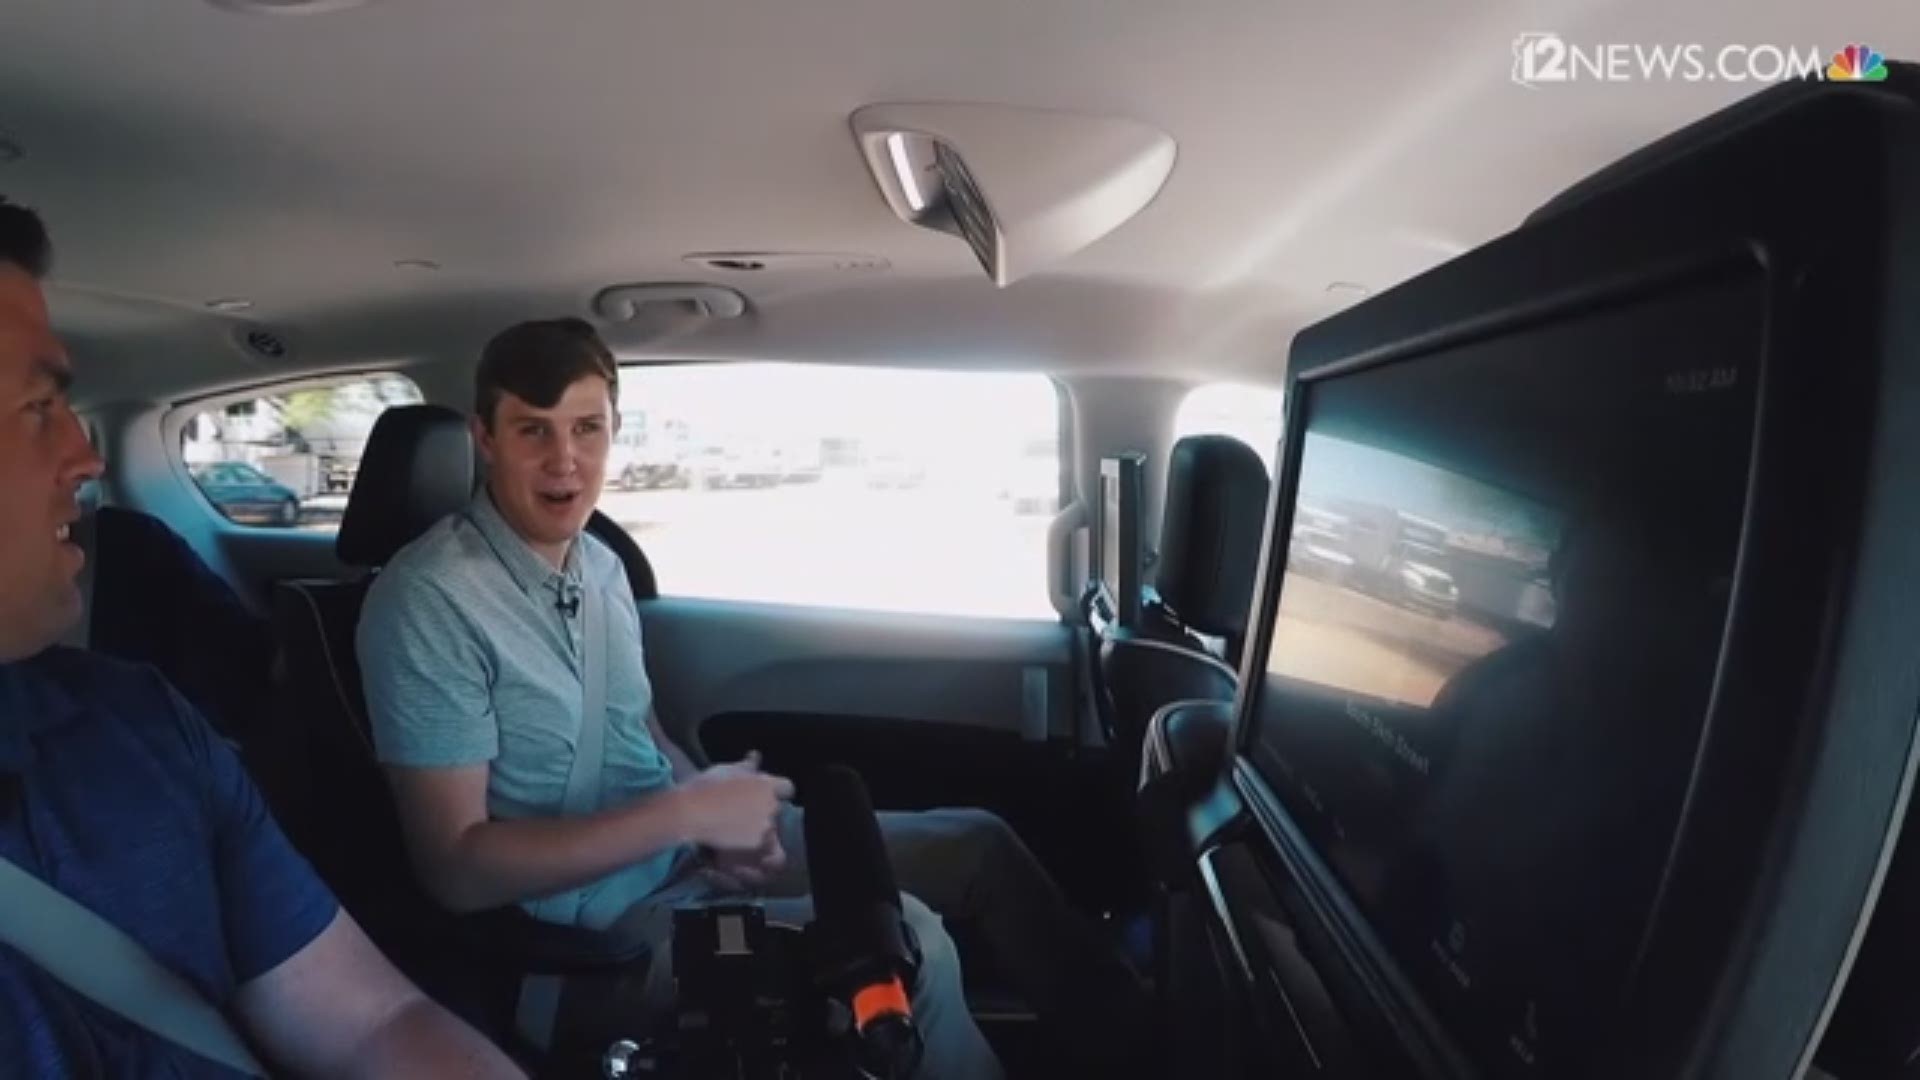 After Waymo launched its pilot driverless ride-hailing service in the Phoenix area, a blind man says it's been a huge help in helping him get around.